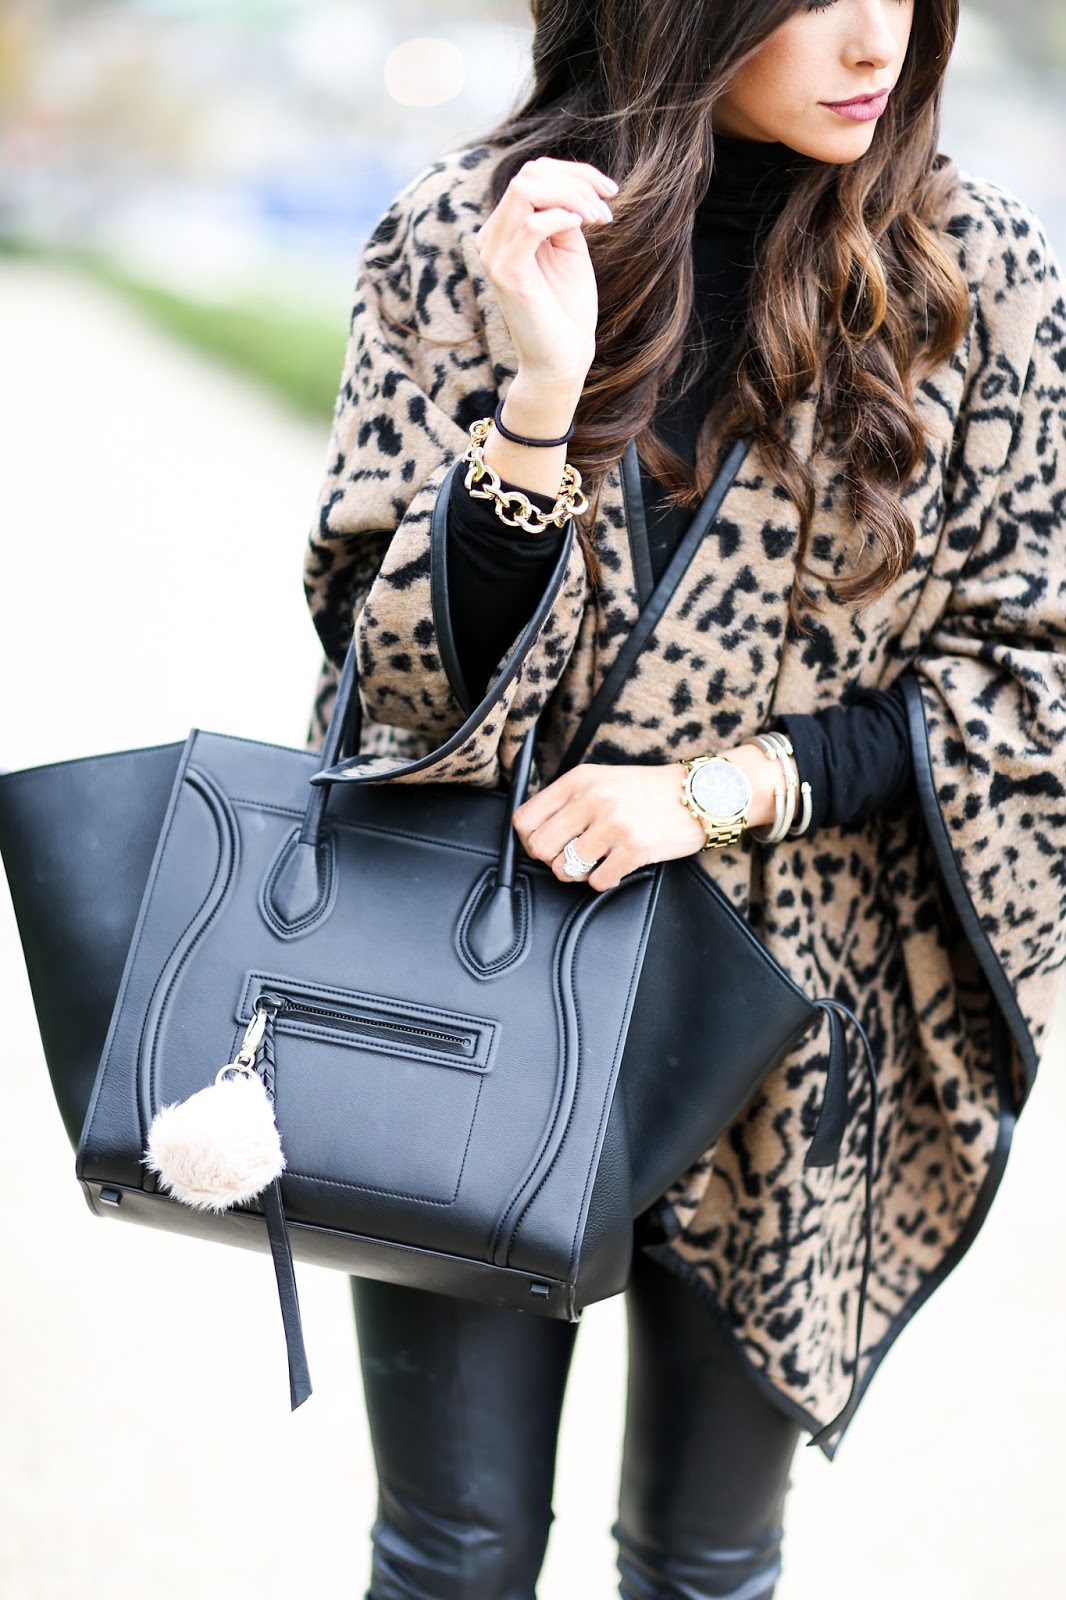 Leopard Print Poncho in Paris | The Sweetest Thing